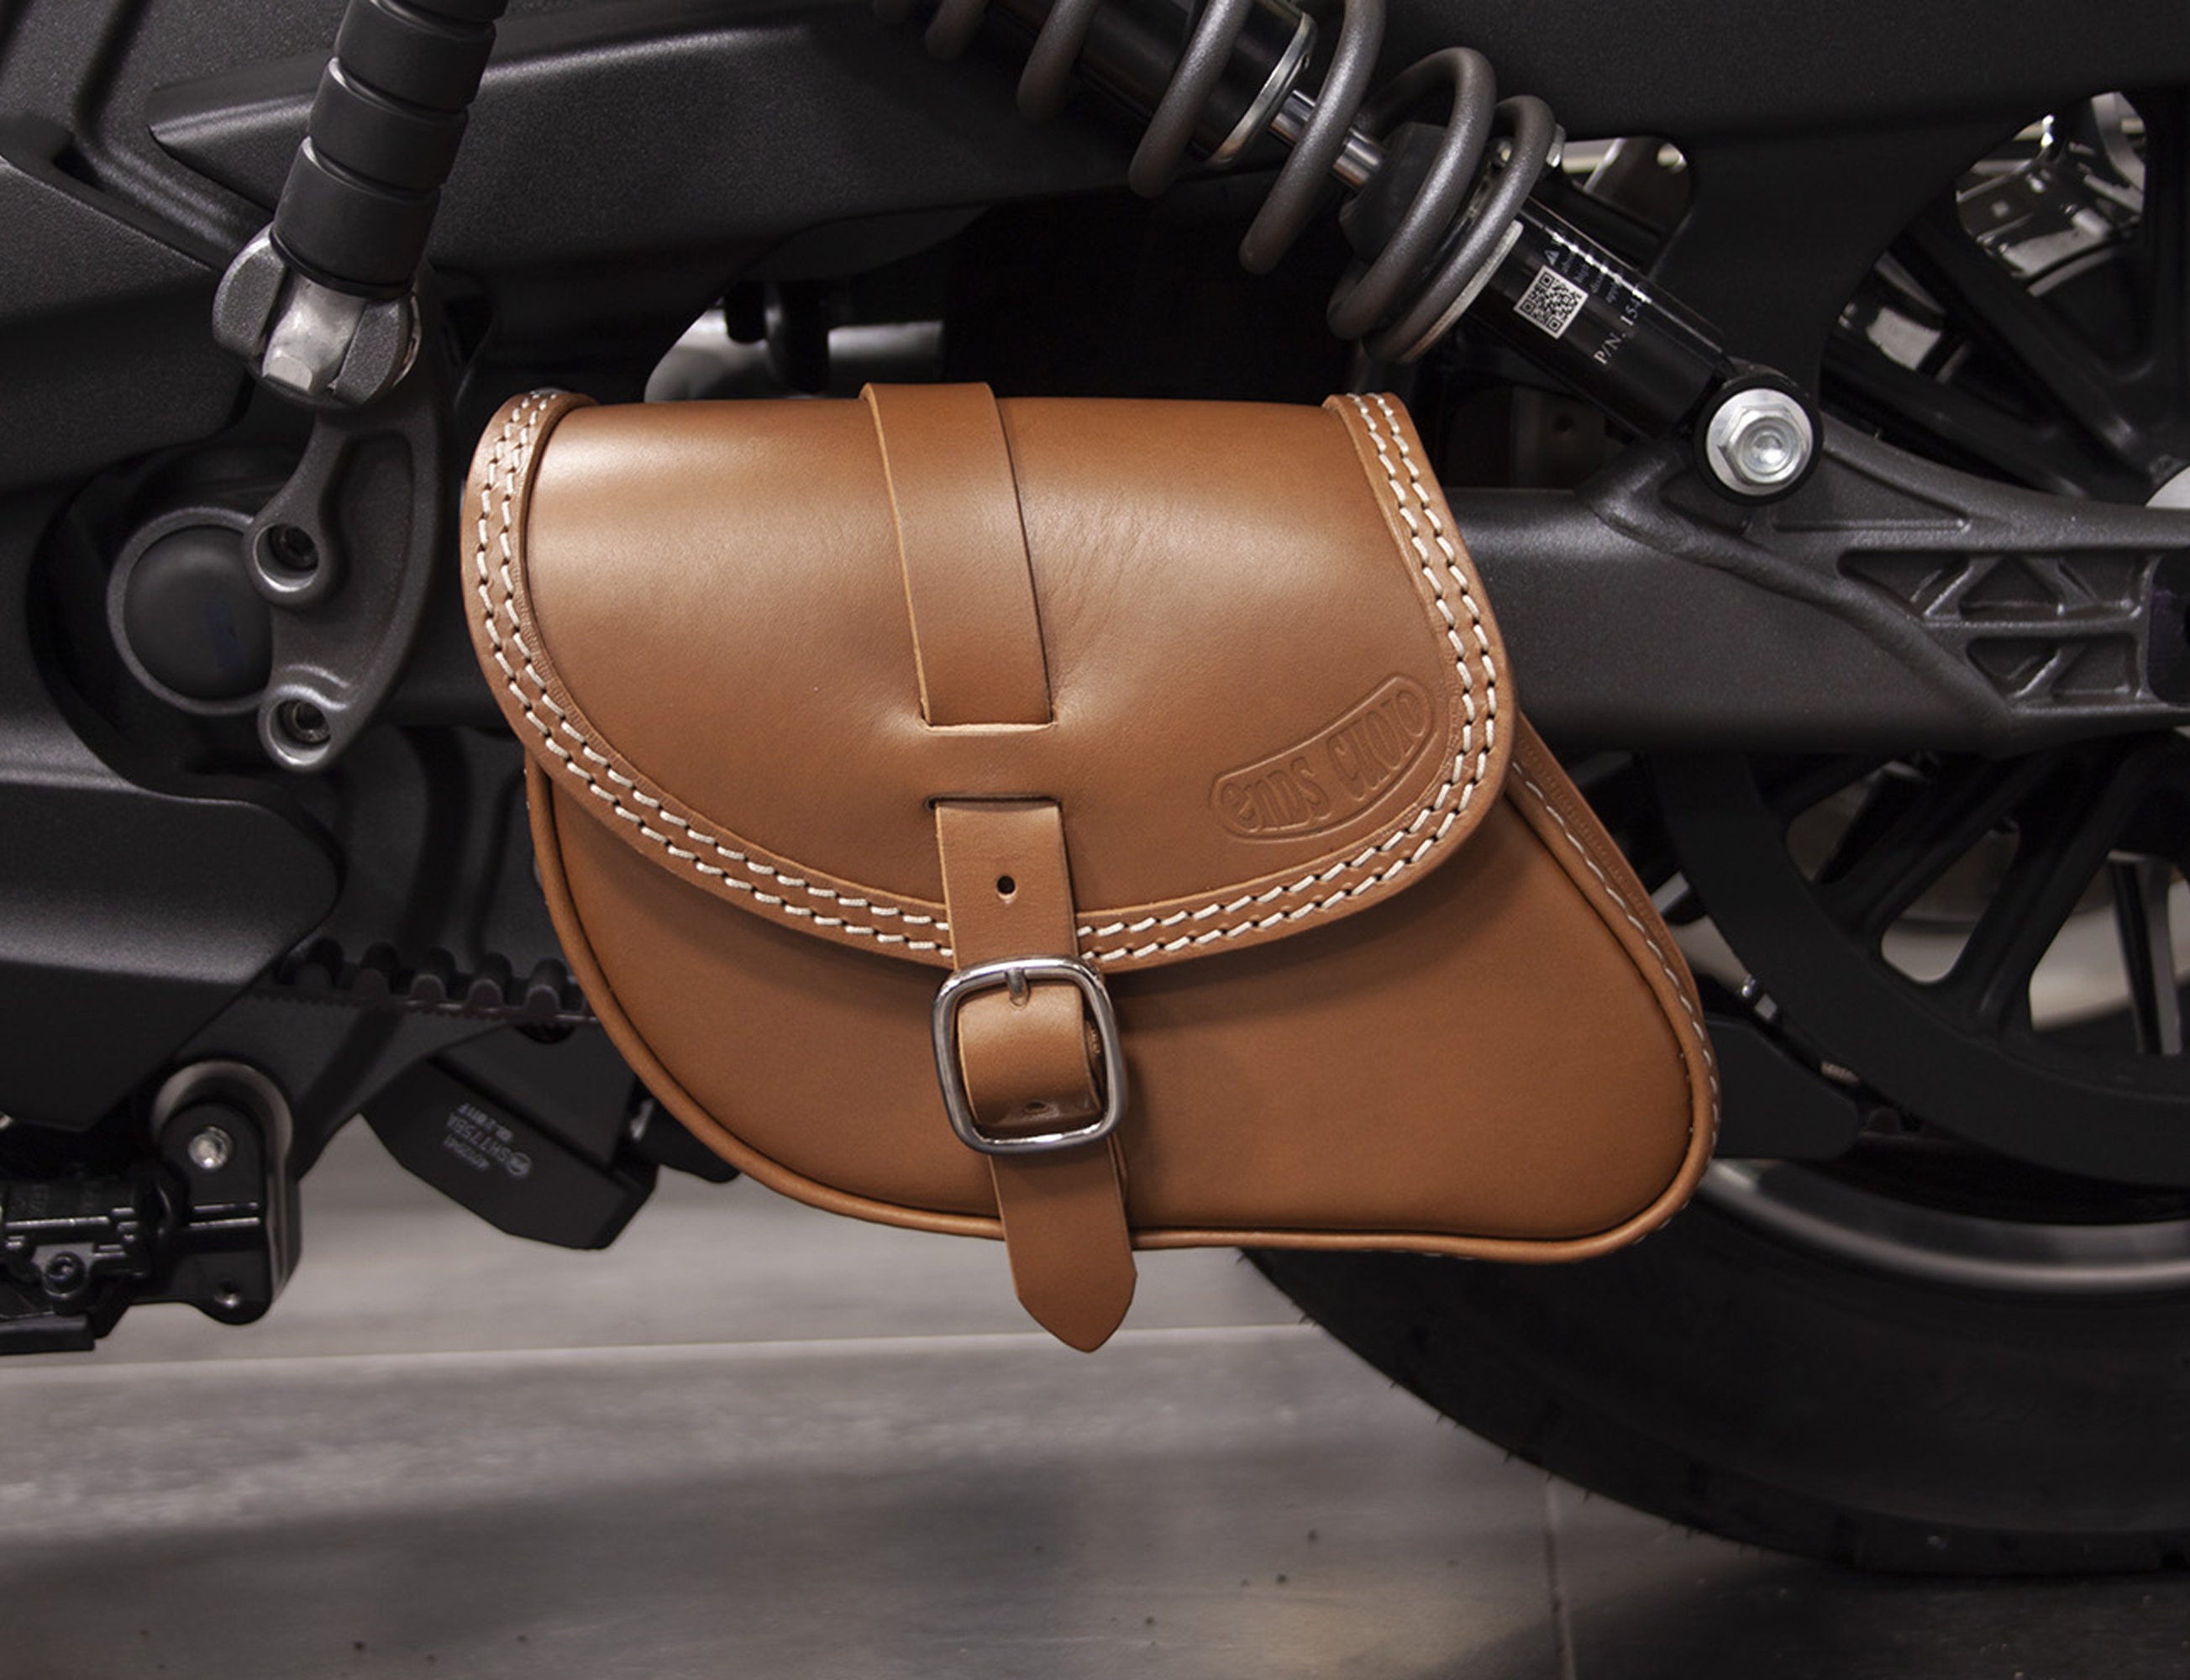 Big Oval - leather tool bag for motorcycles - Ends Cuoio